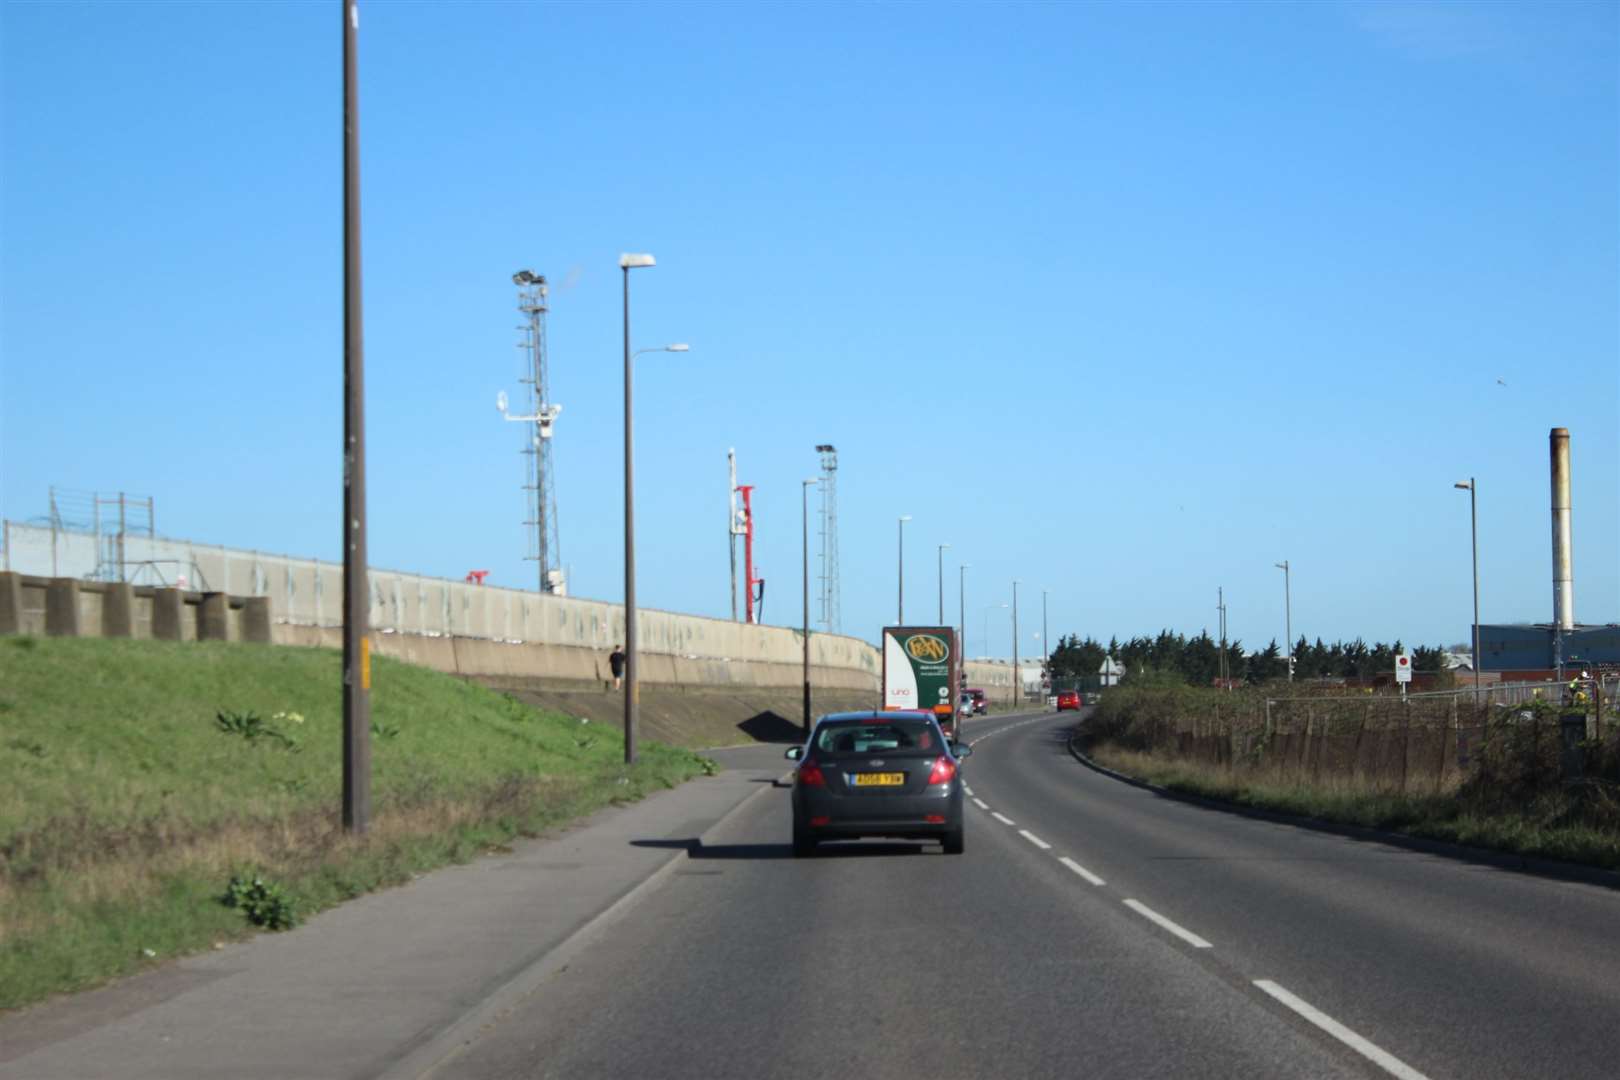 Brielle Way. The cement works will be built on the left behind the sea wall